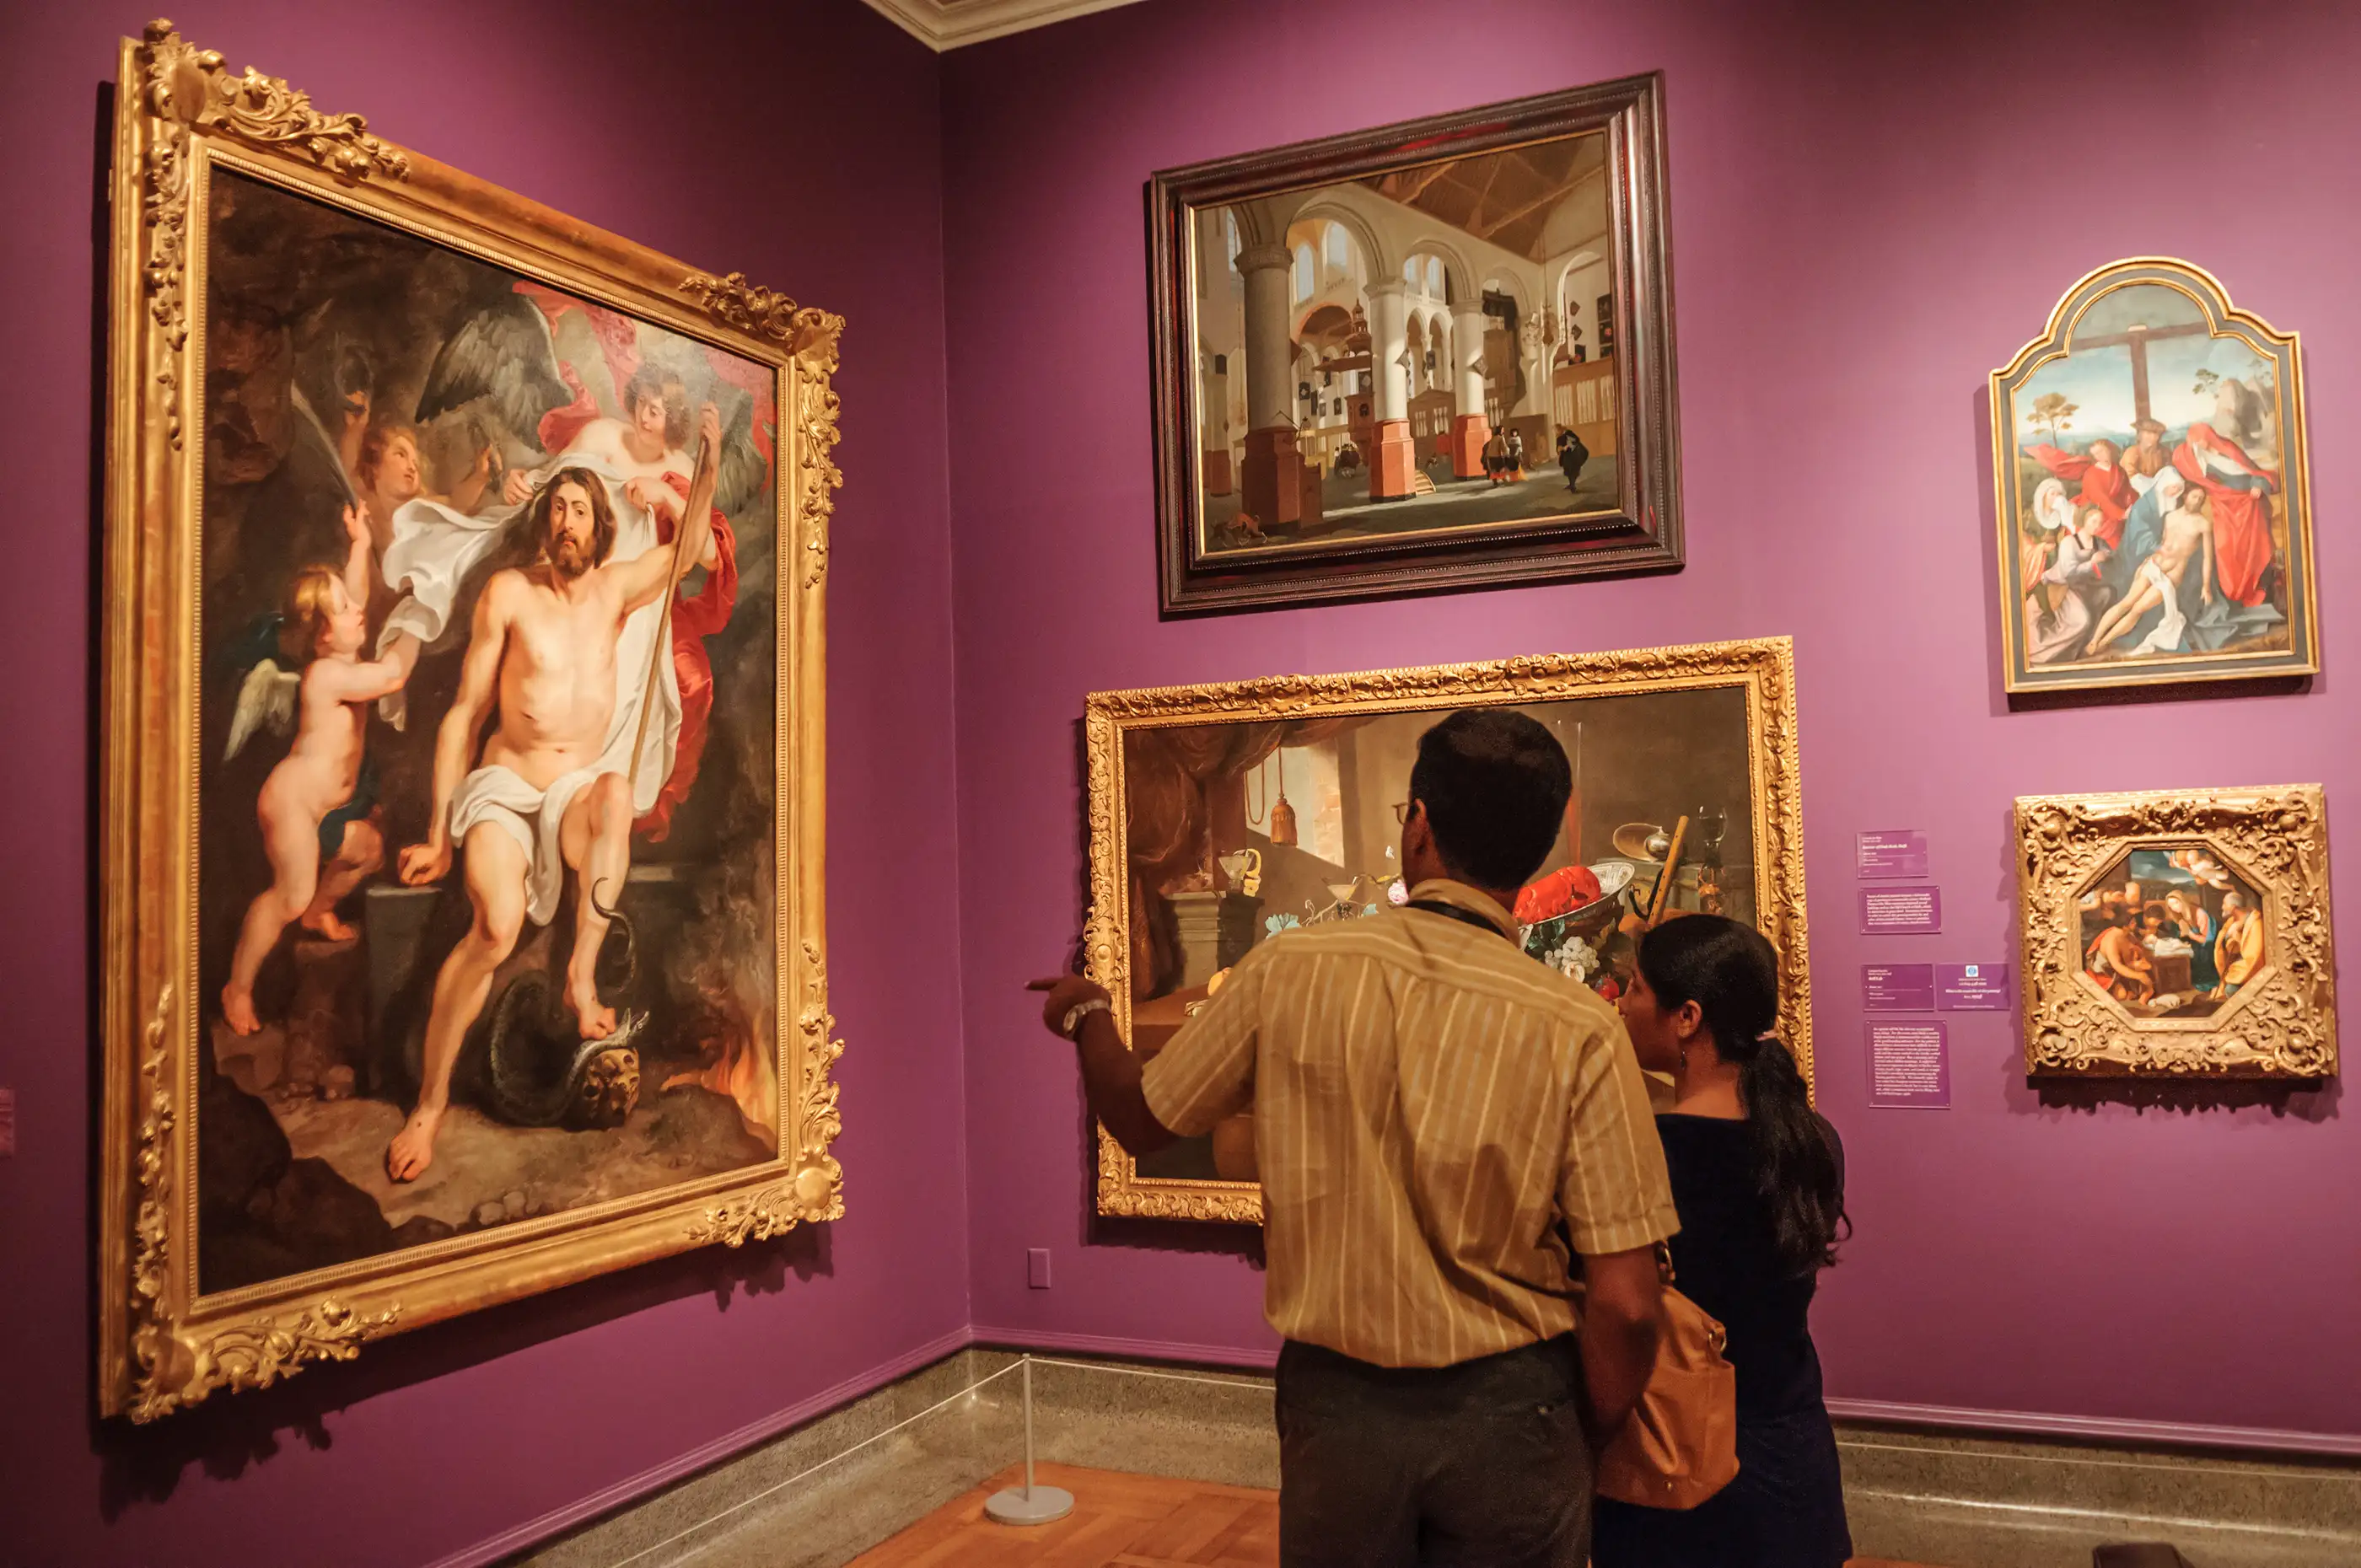 Spend a picture perfect day at the Columbus Museum of Art.